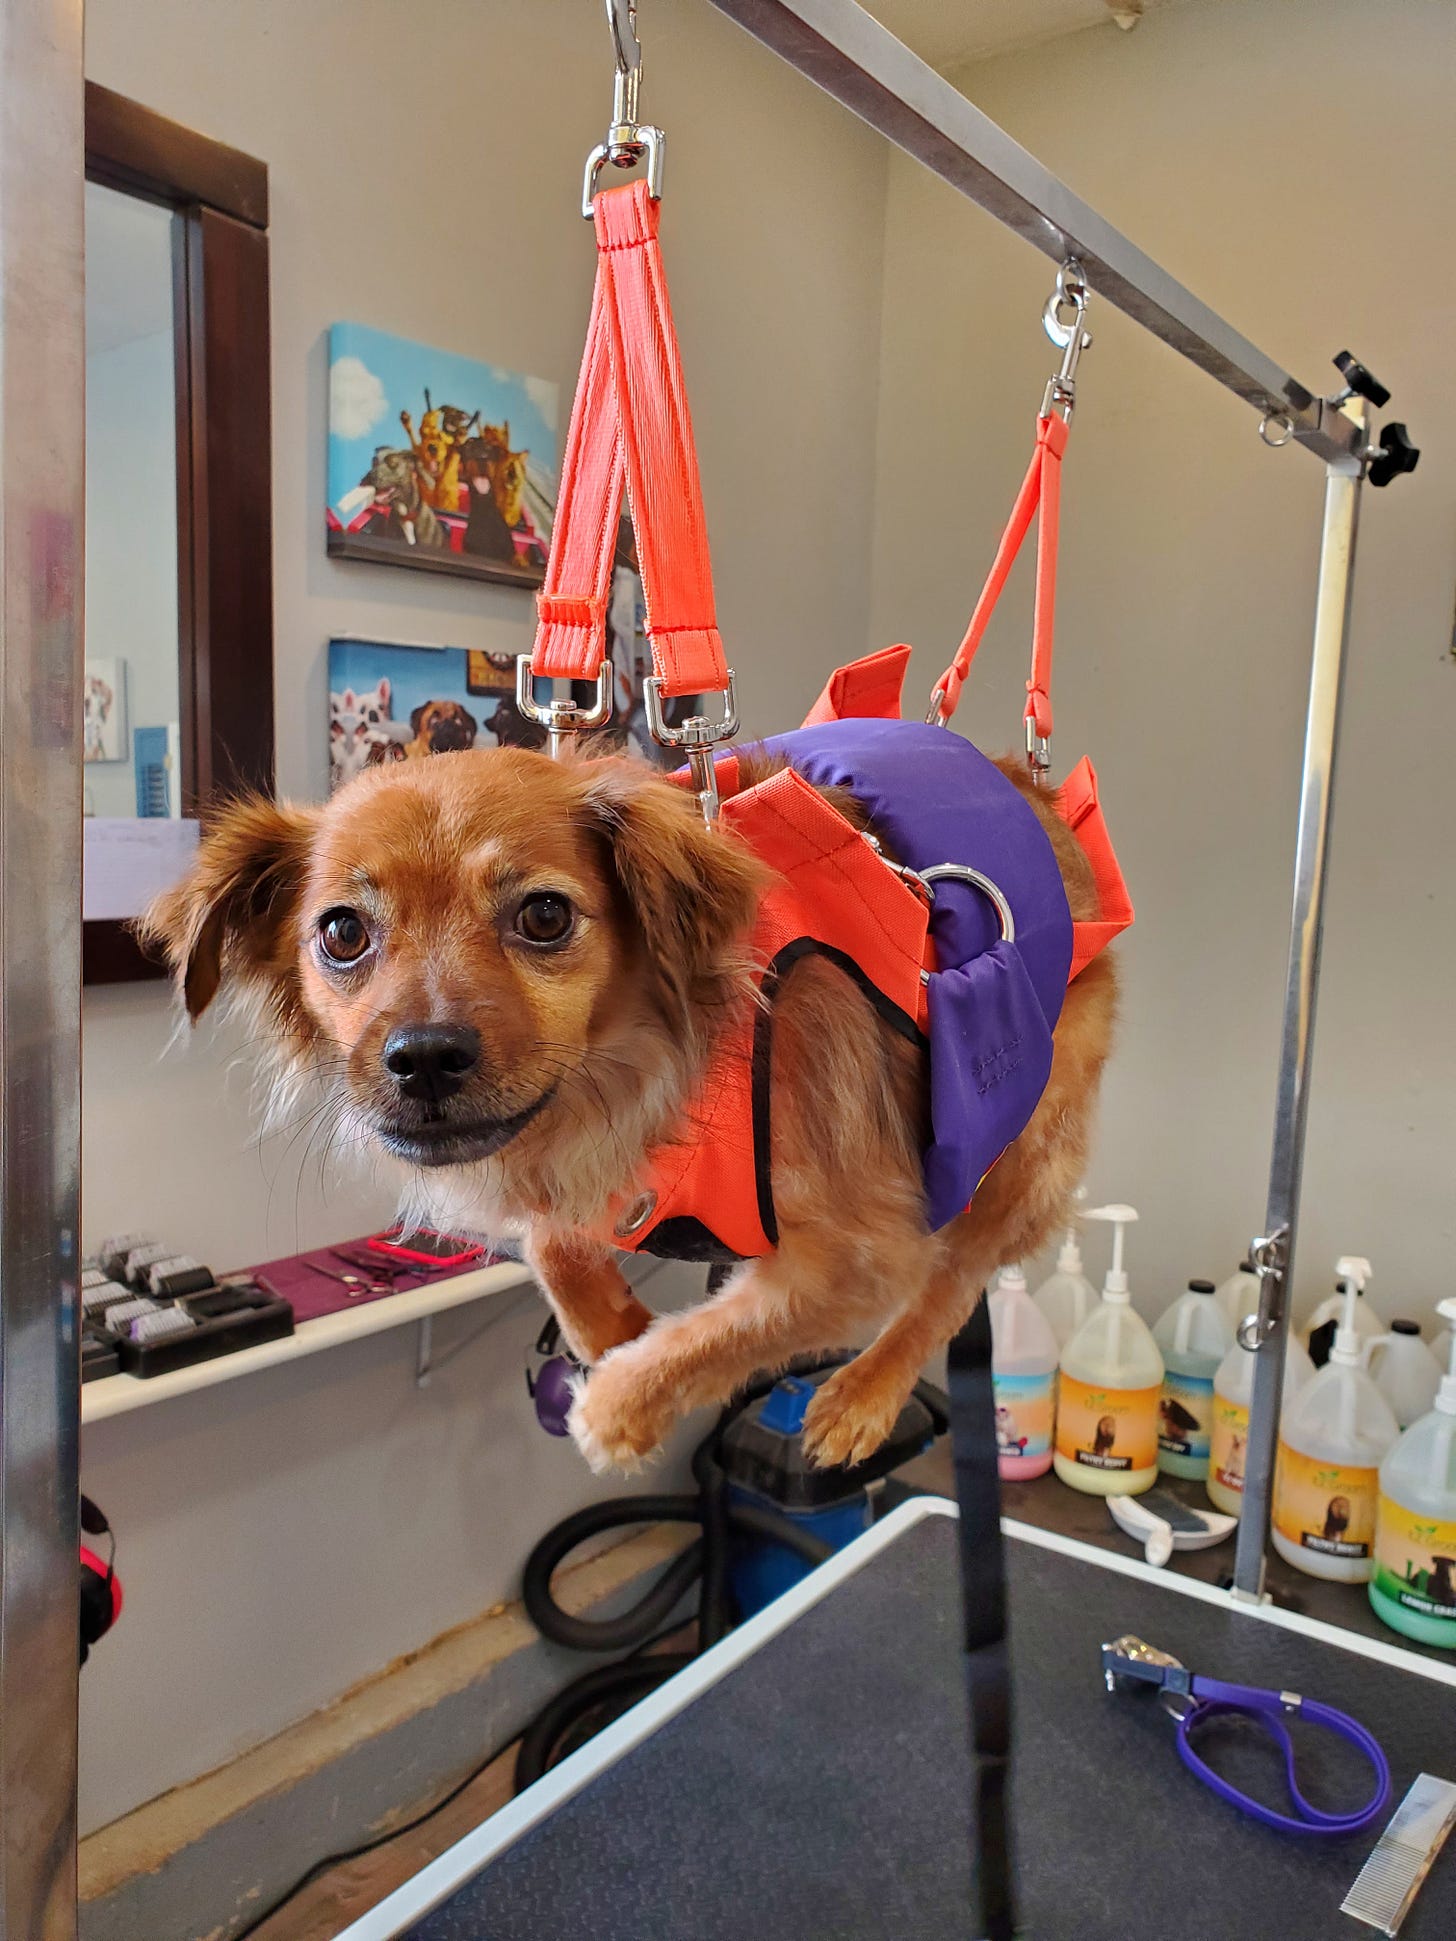 A very cute, small brown dog with shaggy ears looks mournfully at the camera while suspended, mid-air, in a bright orange harness. She is at the groomers and about to get her nails trimmed, which she hates.